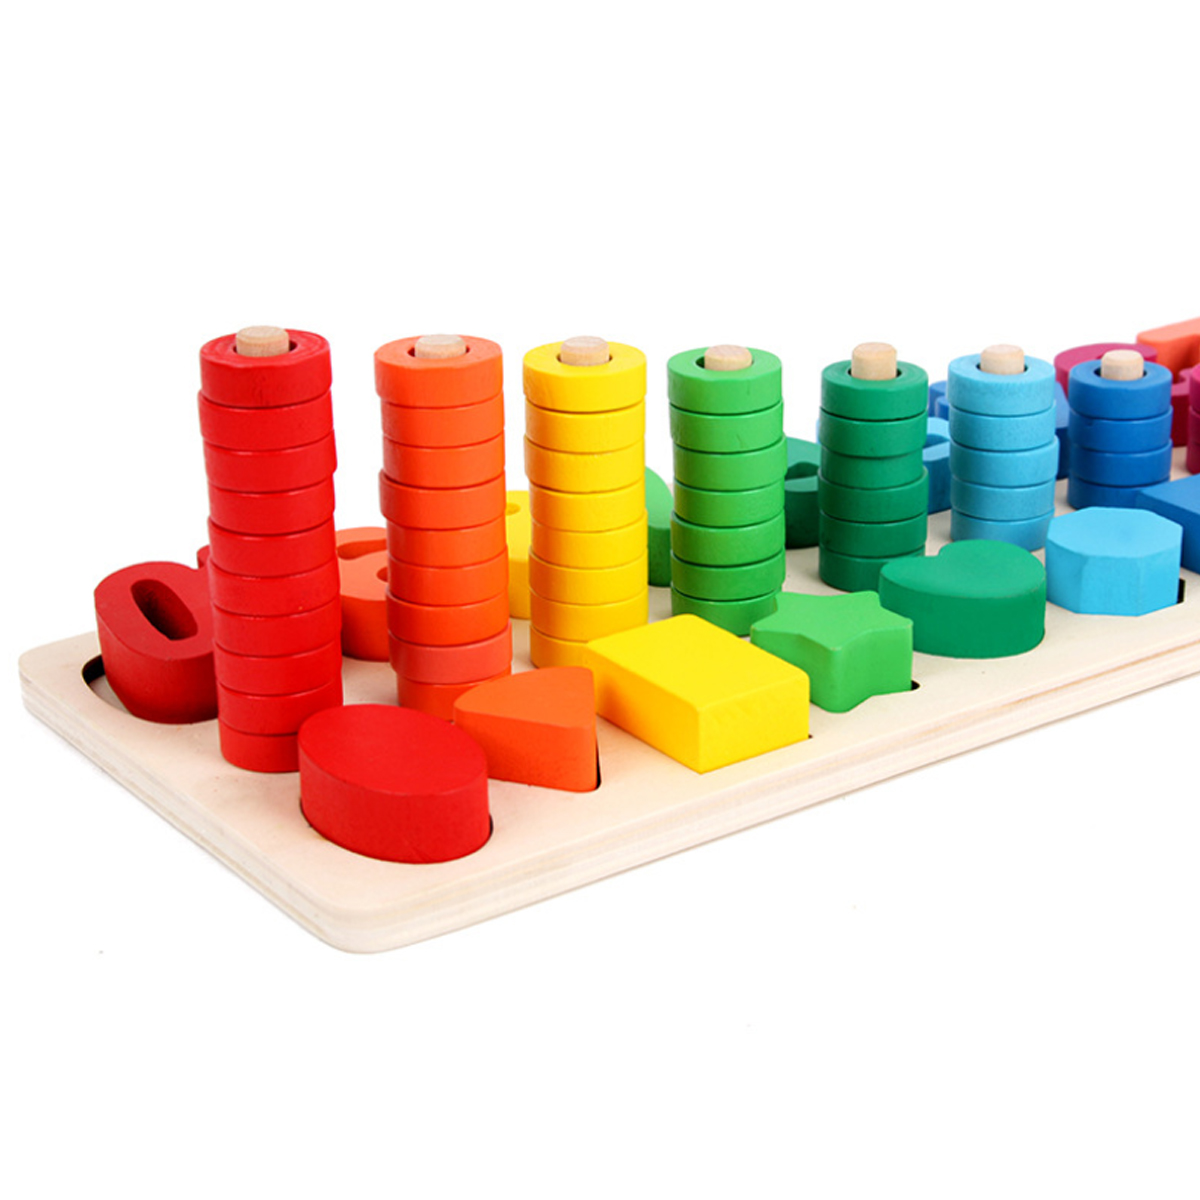 Wooden-Math-Toy-Board-Montessori-Counting-Board-Preschool-Learning-Toys-for-Children-Gifts-1629382-4